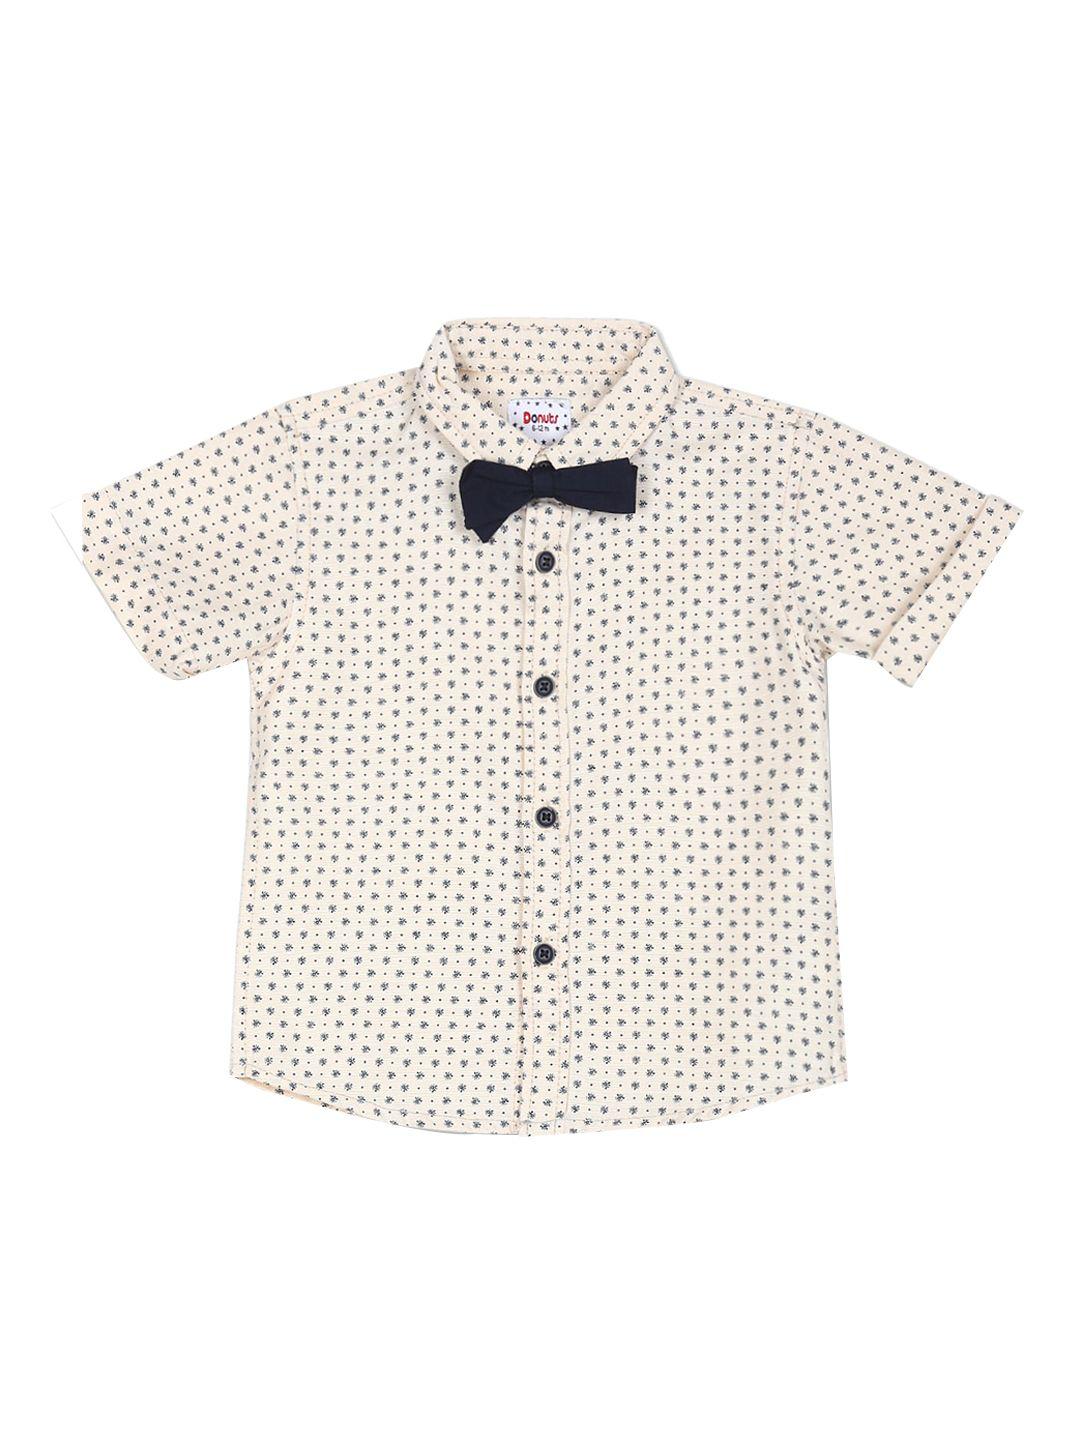 Donuts Boys Beige Printed Casual Shirt